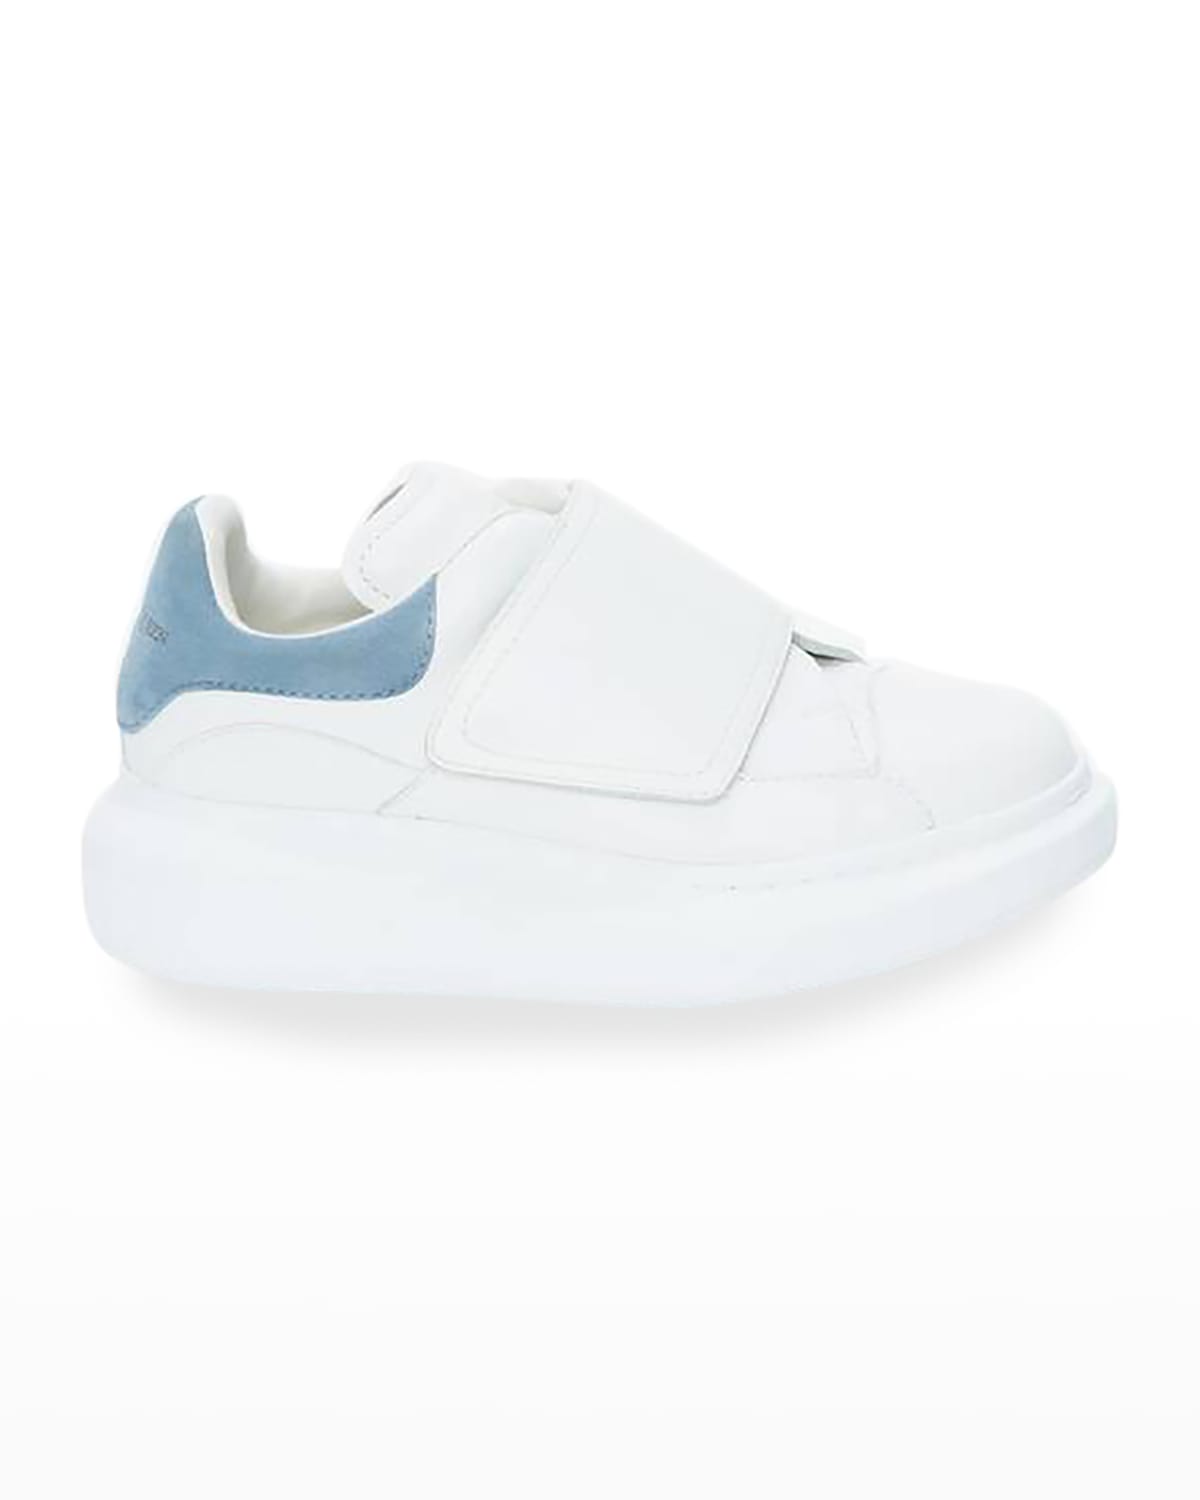 Mix-Leather Grip-Strap Oversized Sneakers, Toddler/Kids